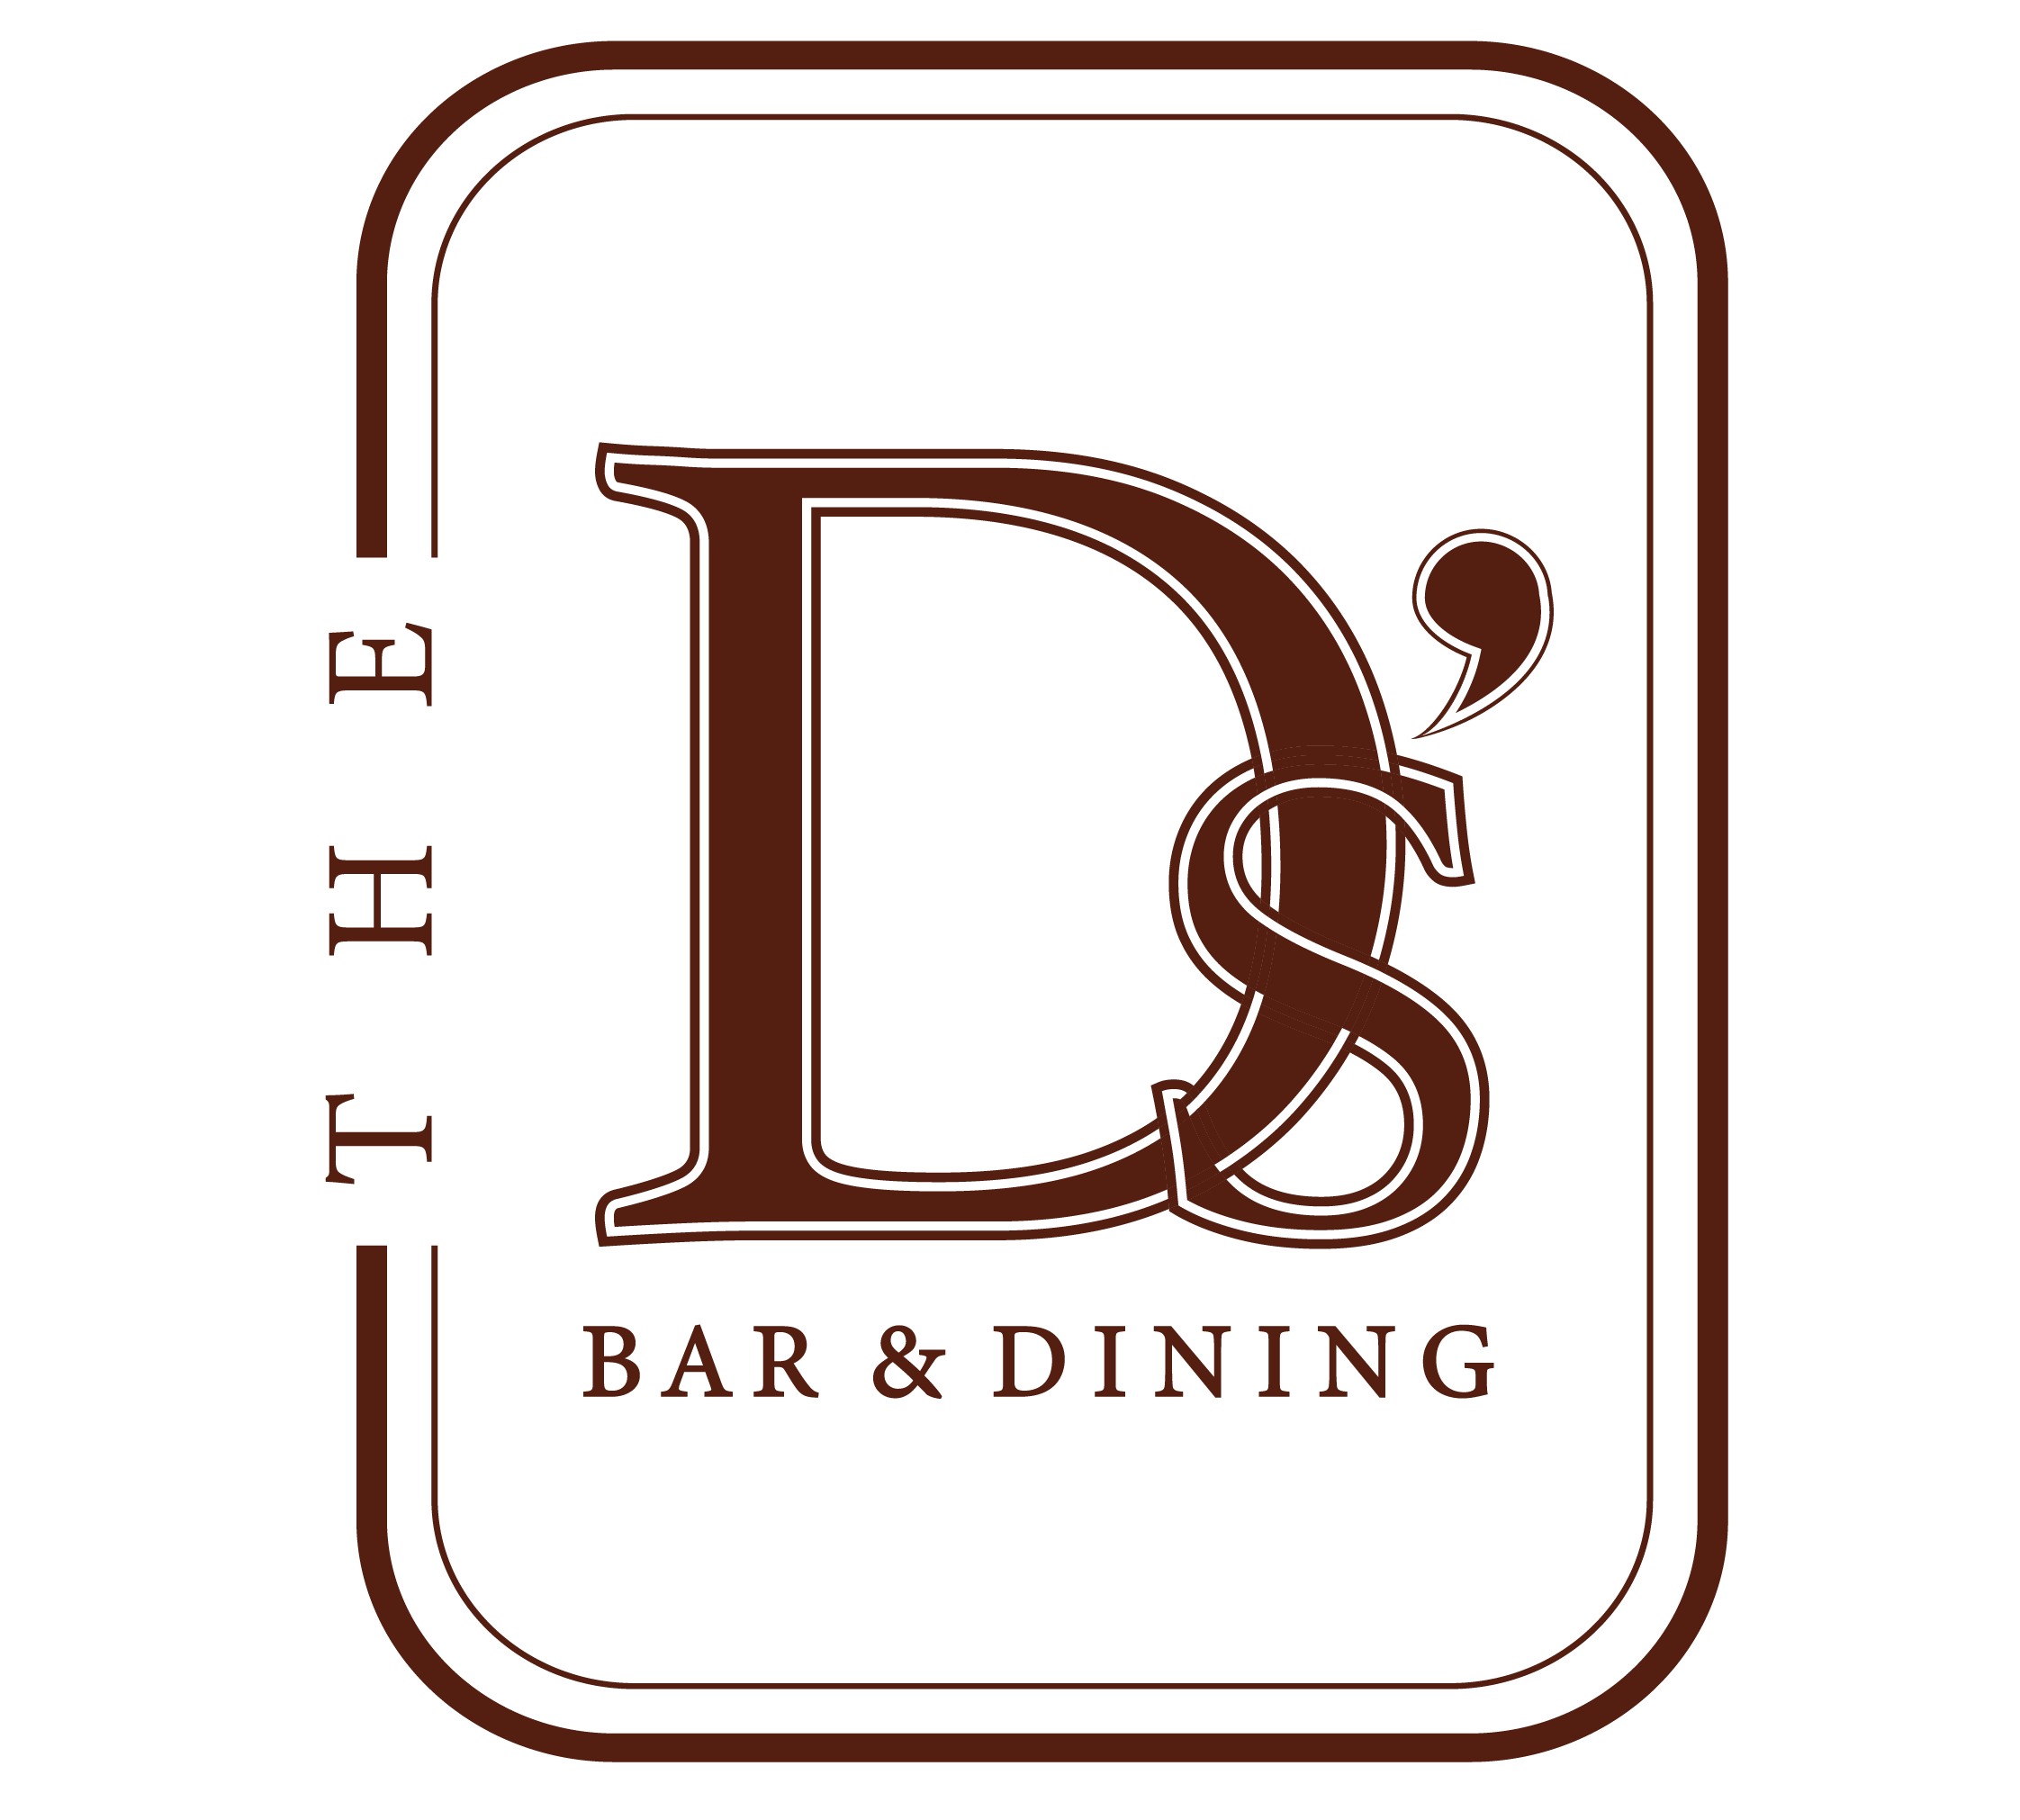 Logo for The D's Bar and Dining including this text in dark red with a surrounding double lined square